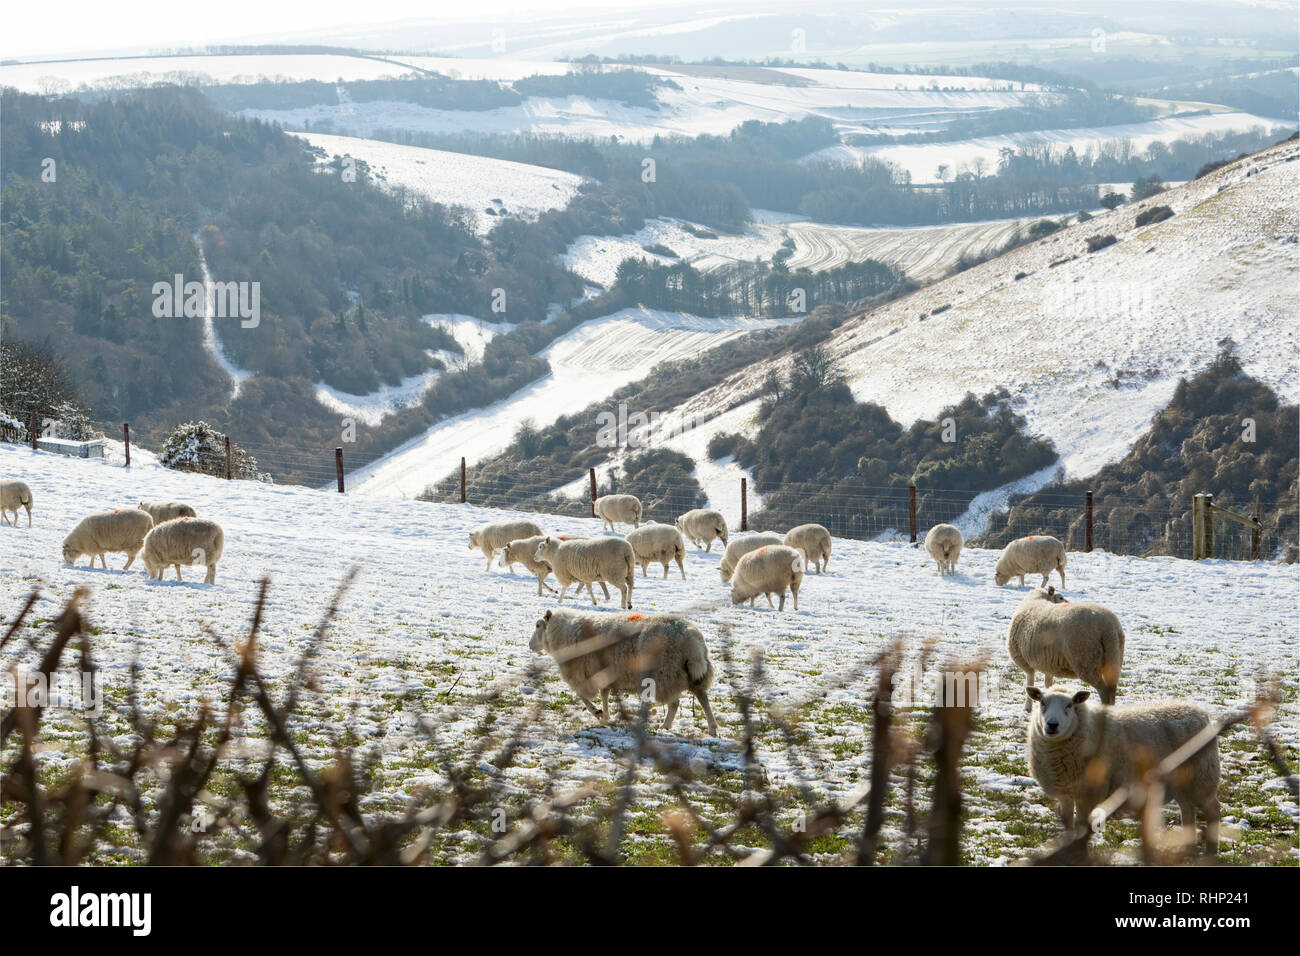 Sheep in snow covered fields against a backdrop of the Blackmore Vale near Shaftesbury, North Dorset England UK GB 2.2.2019 Stock Photo